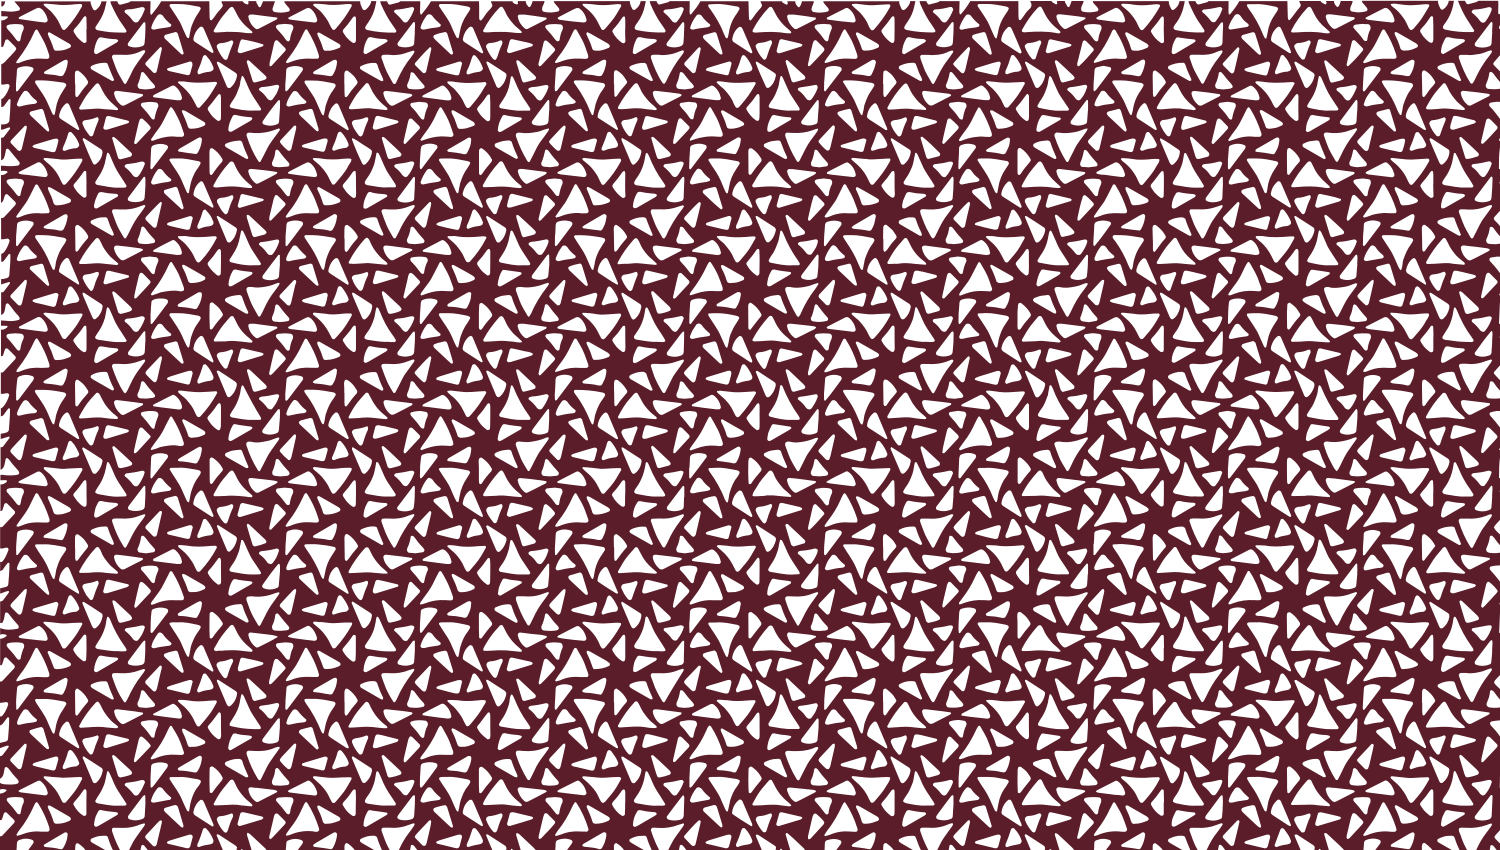 Parasoleil™ Spinnaker© pattern displayed with a burgundy color overlay